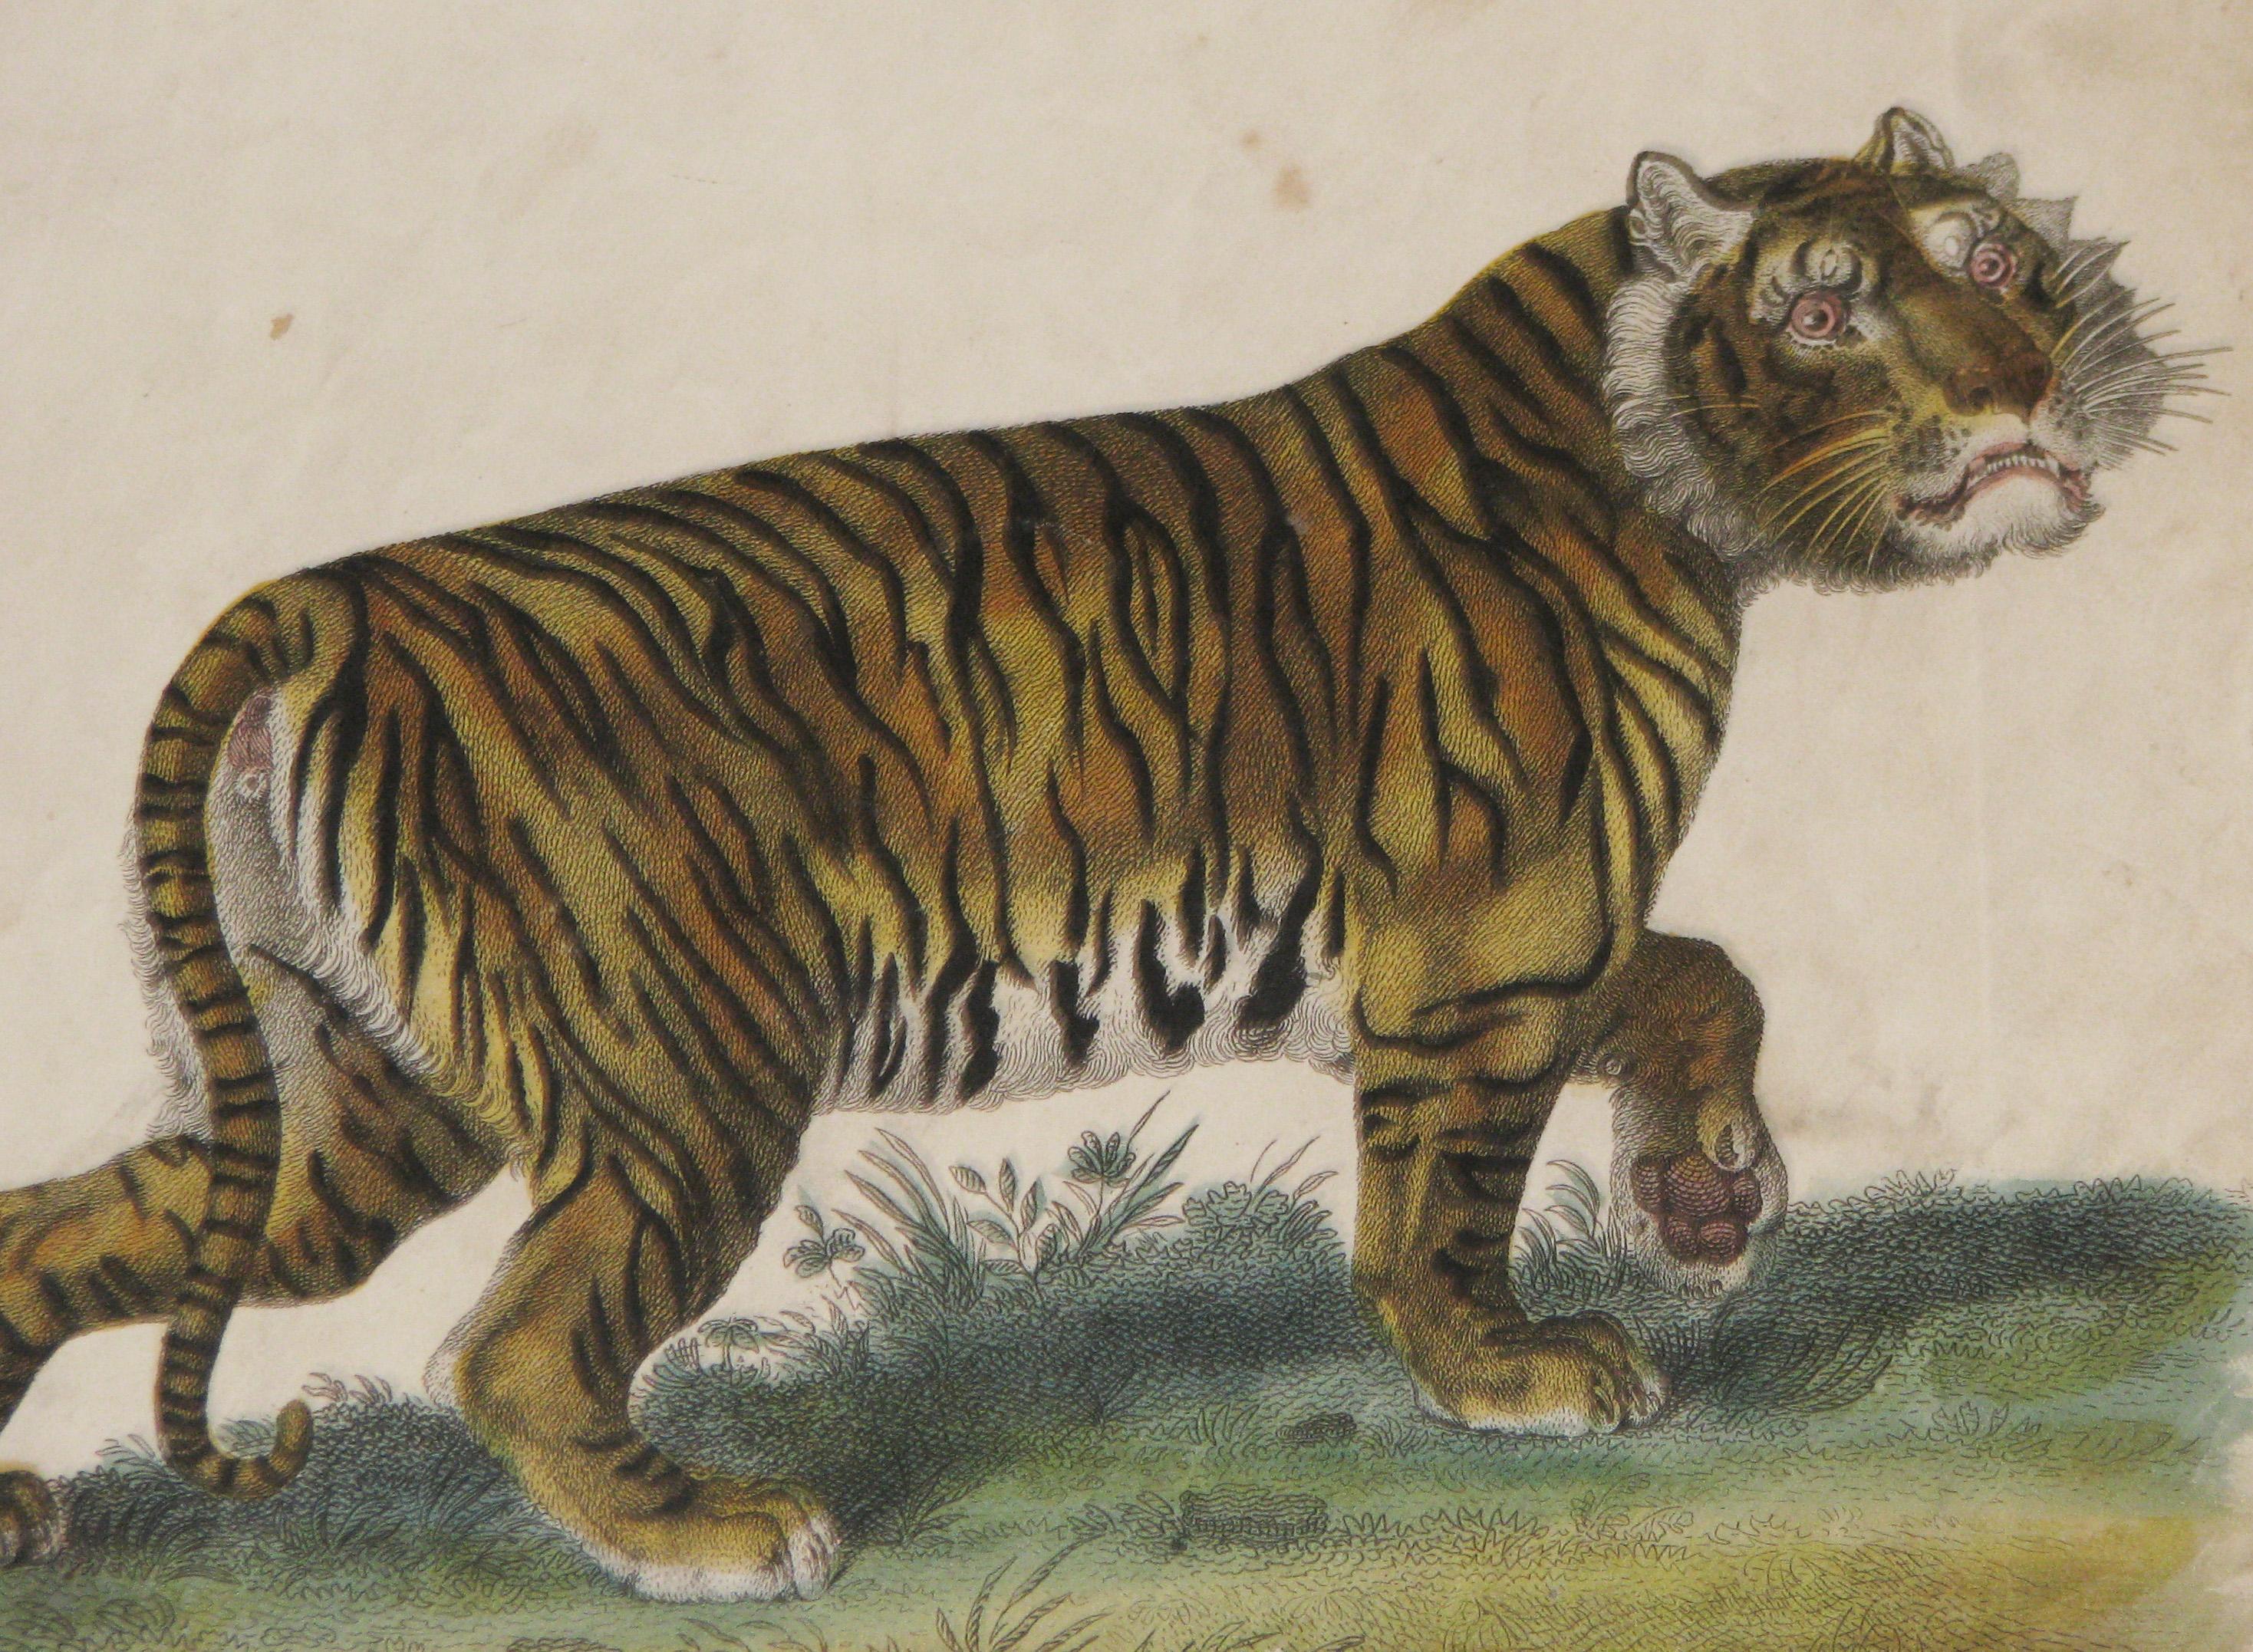 A Regency period copper plate engraving of a Tiger by William Darton.
Encribed 'The Tiger' and published in London, William Darton, 38 Holborn Hill, August 29th, 1821.
Retaining the original hand color.
Presented in a bespoke hand painted and